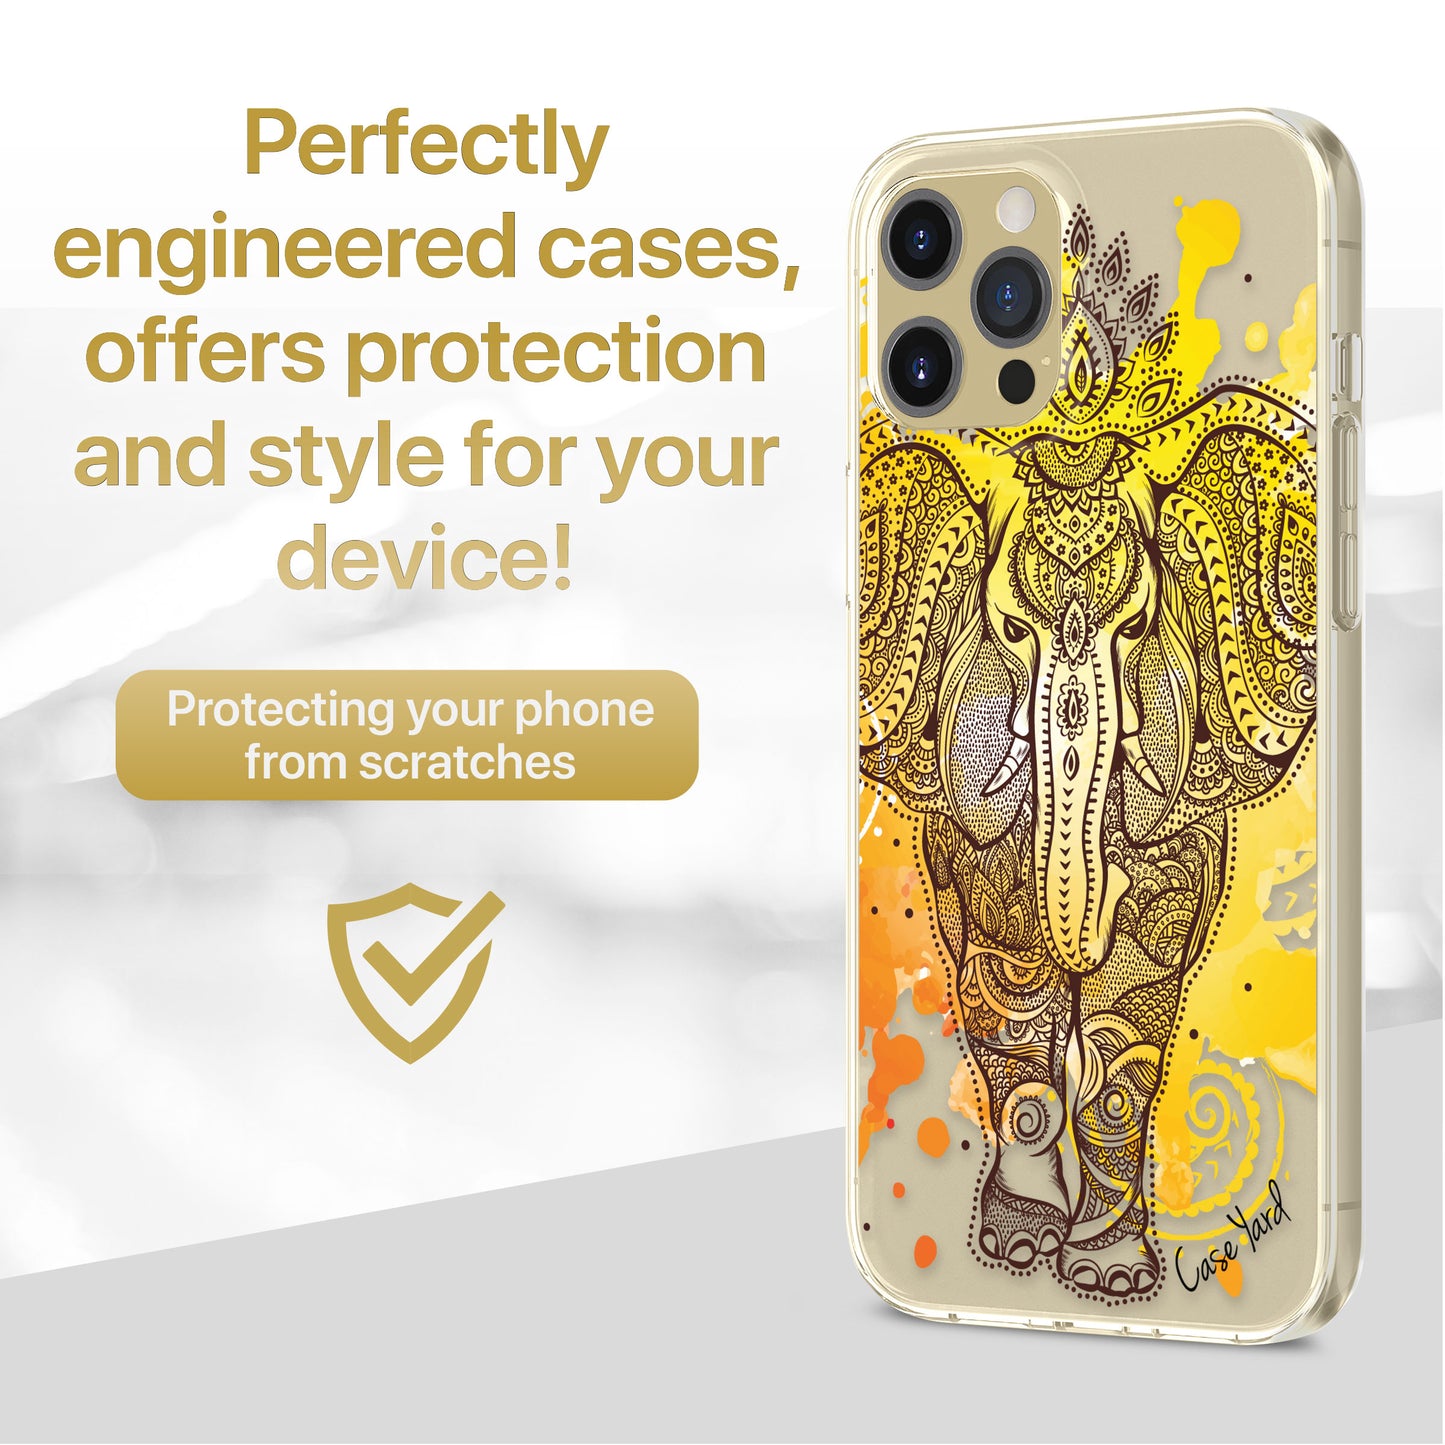 TPU Clear case with (Elephant Stain) Design for iPhone & Samsung Phones